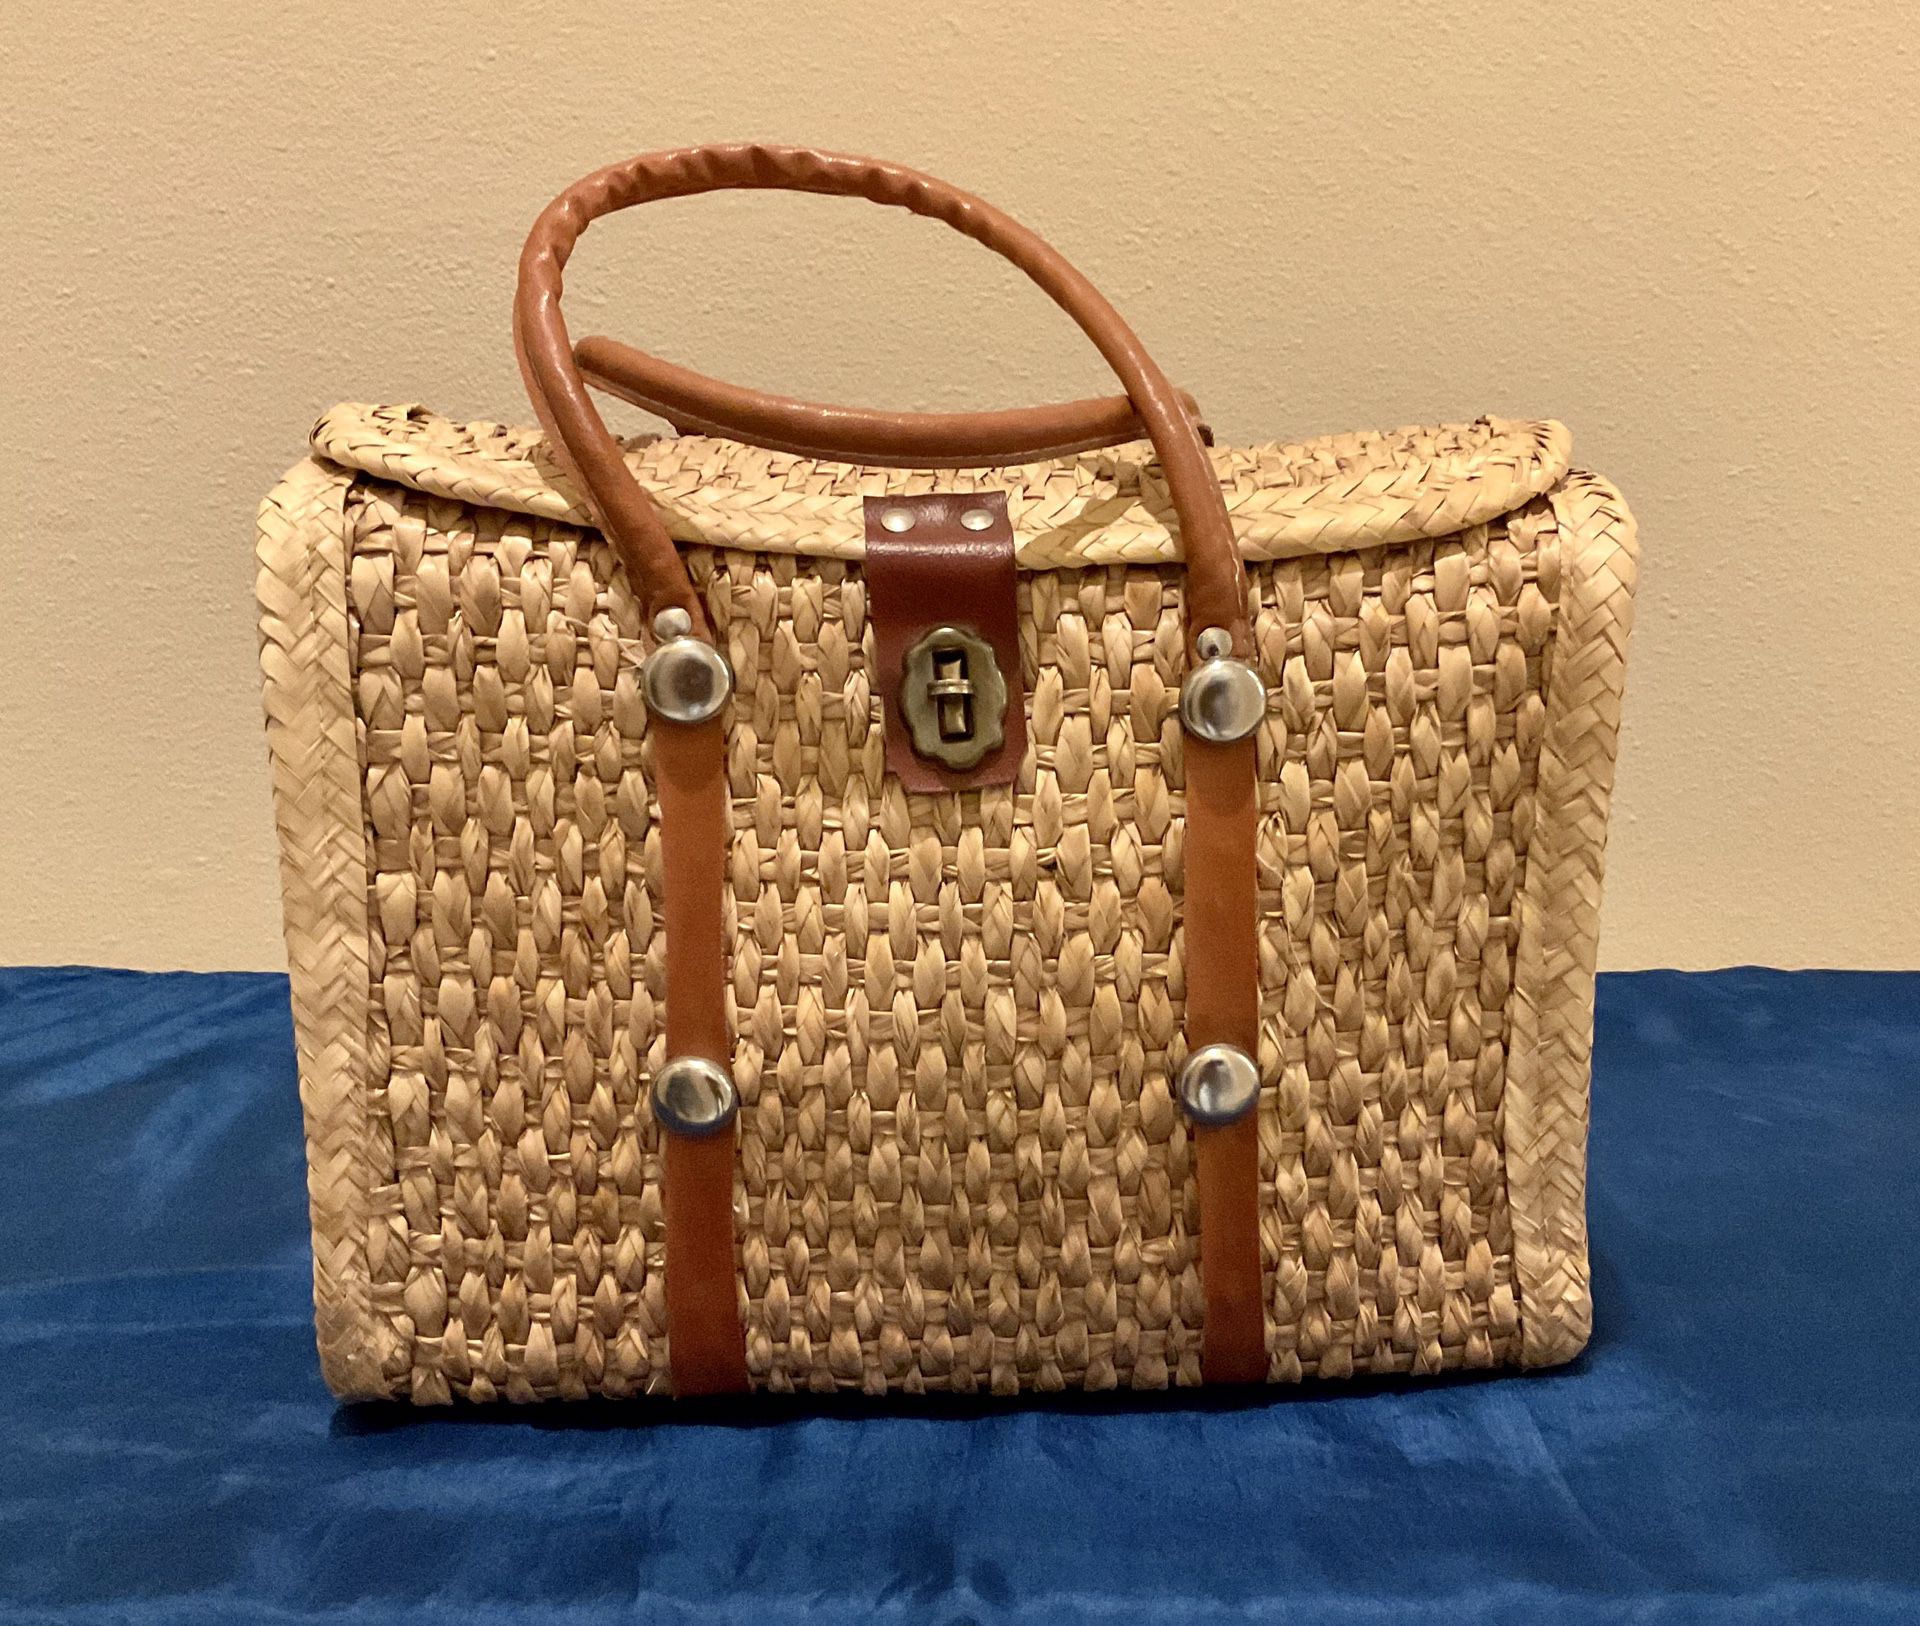 Woven Straw Mexican Boho Market Handbag with 2 Leather Handles and Twist Closure